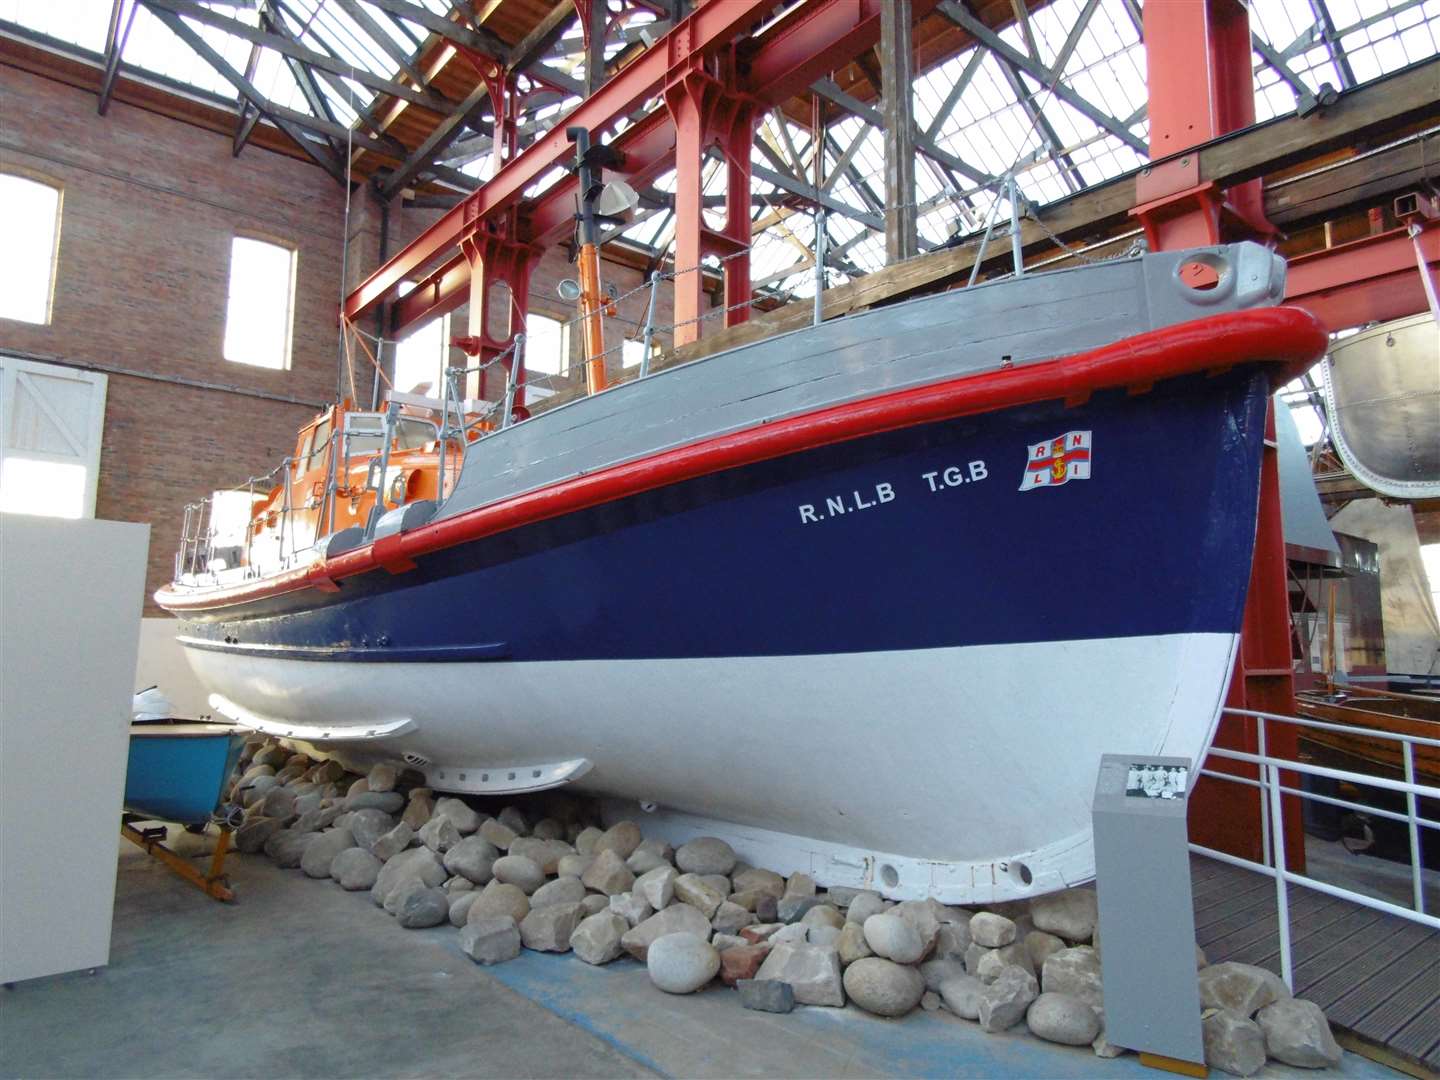 RNLI TGB was salvaged and refurbished. In the late 1970s the RNLI converted all their boats to self-righting. In the case of the Watson 47 most of the boats were fitted with an airbag on the rear cabin deigned to inflate if the boat heeled beyond 100 degrees. TGB was stationed in Ireland before retiring from service in 1979, and was loaned to the Scottish Maritime Museum in Ayr. Picture: RNLI